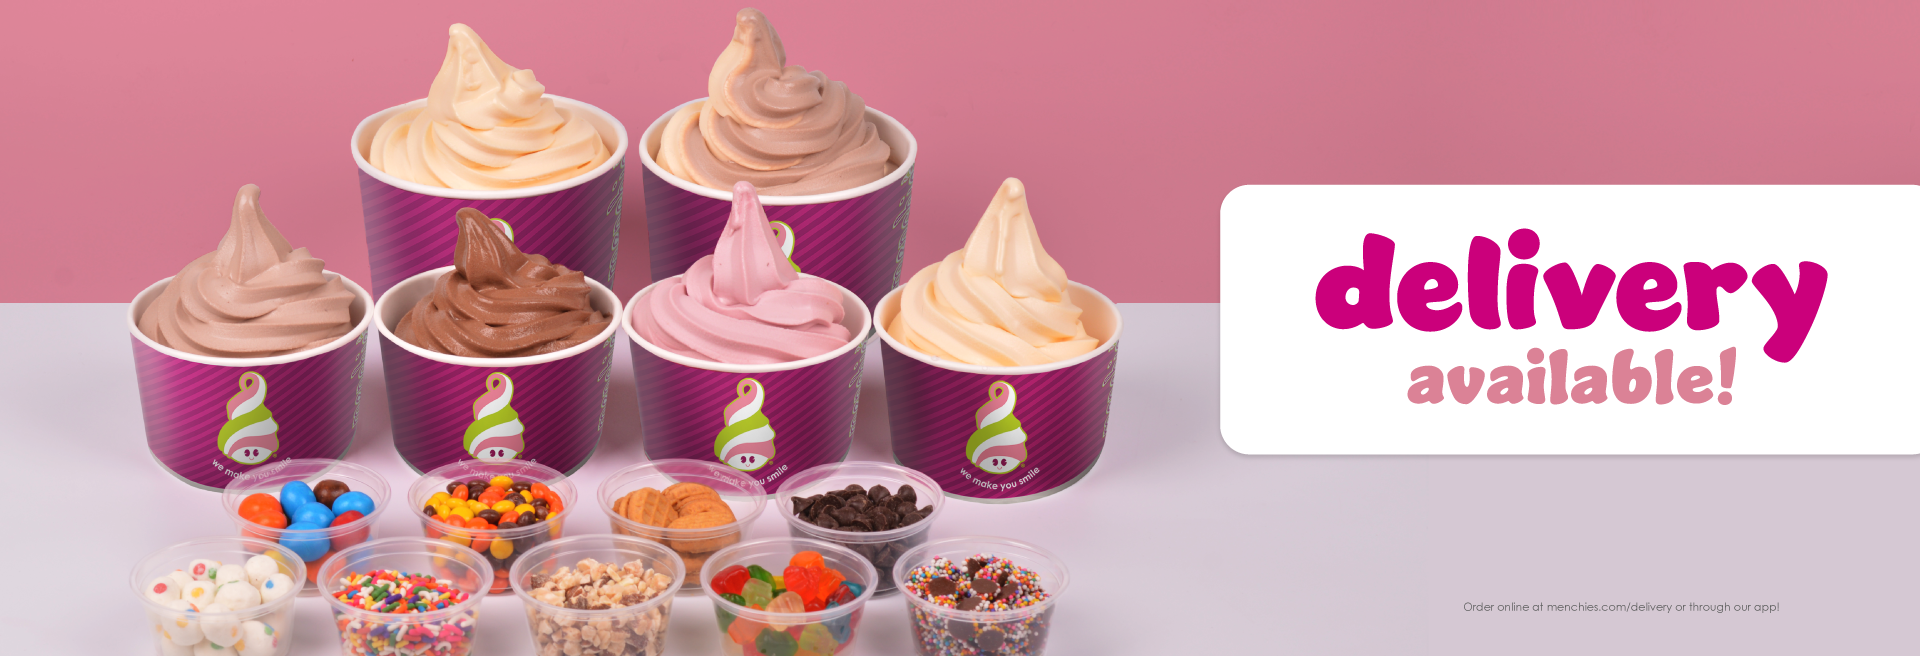 Satisfy your ice cream cravings with a Menchie’s delivery straight to your door!